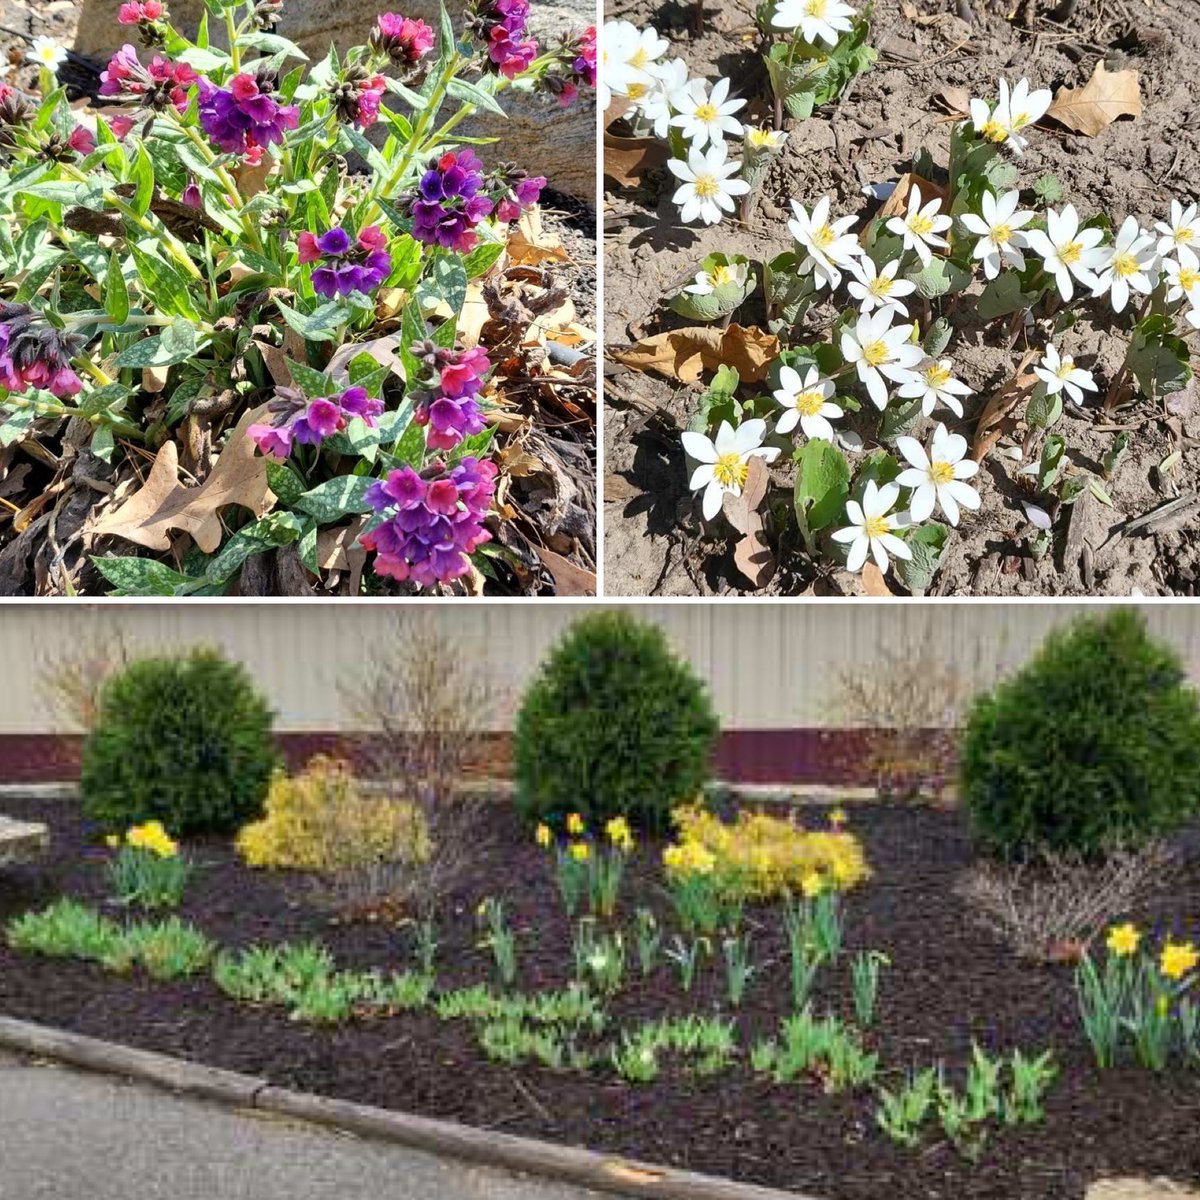 Here’s some of what all of those April showers & our busy groundskeeper were busy creating. Happy May! We love the beauty that appears at the park every Spring. It grows bigger and more gorgeous as the summer goes on. #fyp #mayflowers #gardening #sun #love #lifeisgood #zoo